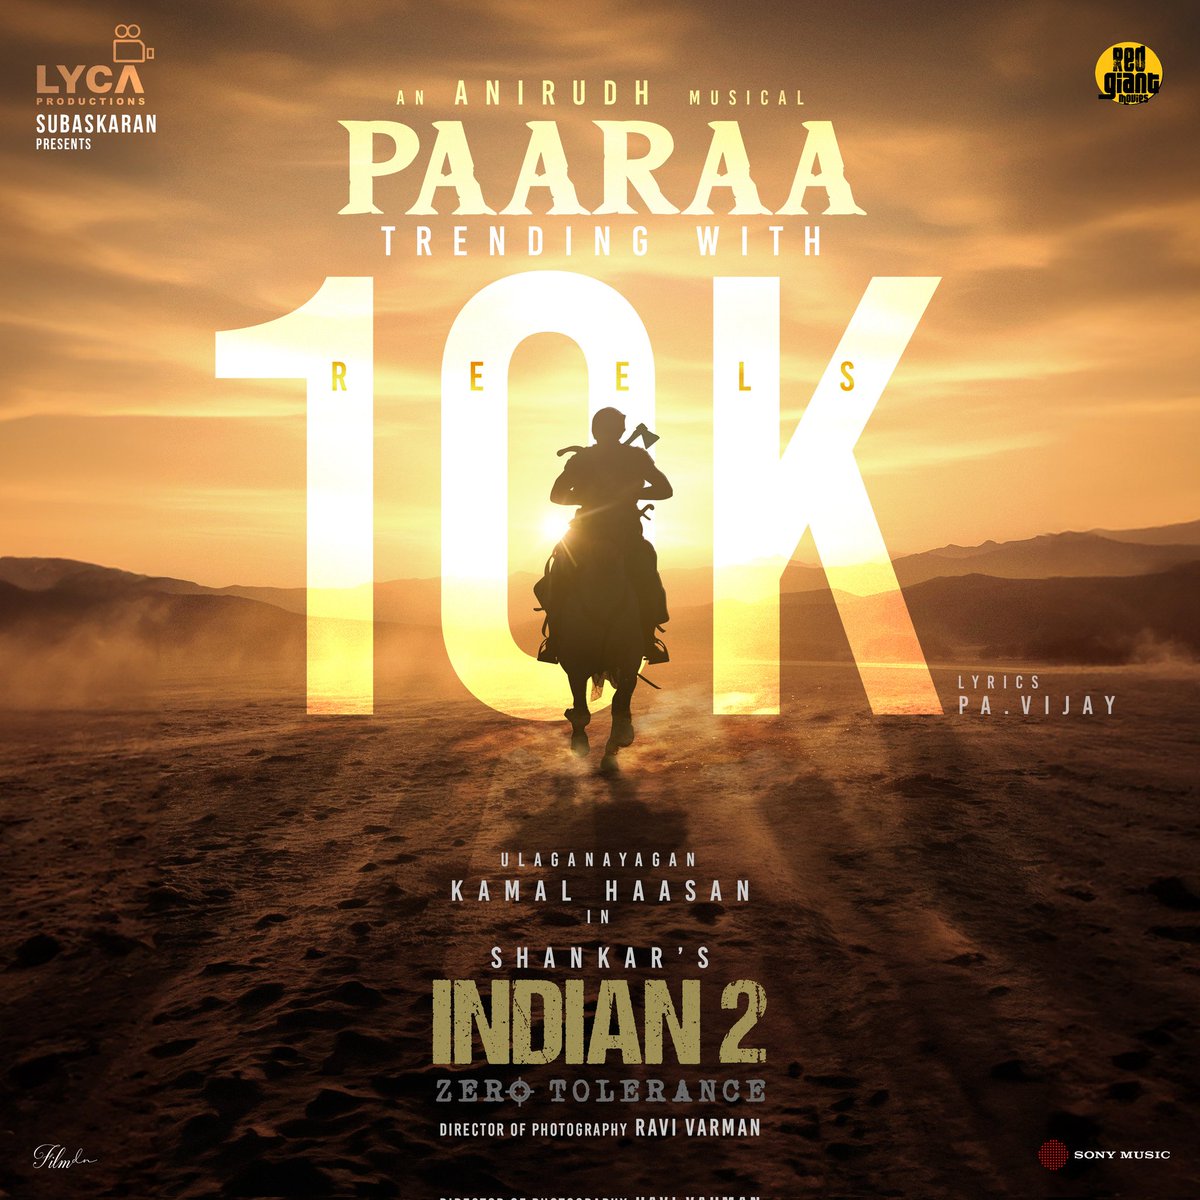 RIGHT ON CHARTS 🔝 #Paaraa from #Indian2 🇮🇳 TRENDING WITH 1️⃣0️⃣K REELS ❤️‍🔥 ➡️ instagram.com/reels/audio/75… #Ulaganayagan @ikamalhaasan @LycaProductions @shankarshanmugh @anirudhofficial @RedGiantMovies_ #Indian2onJuly12